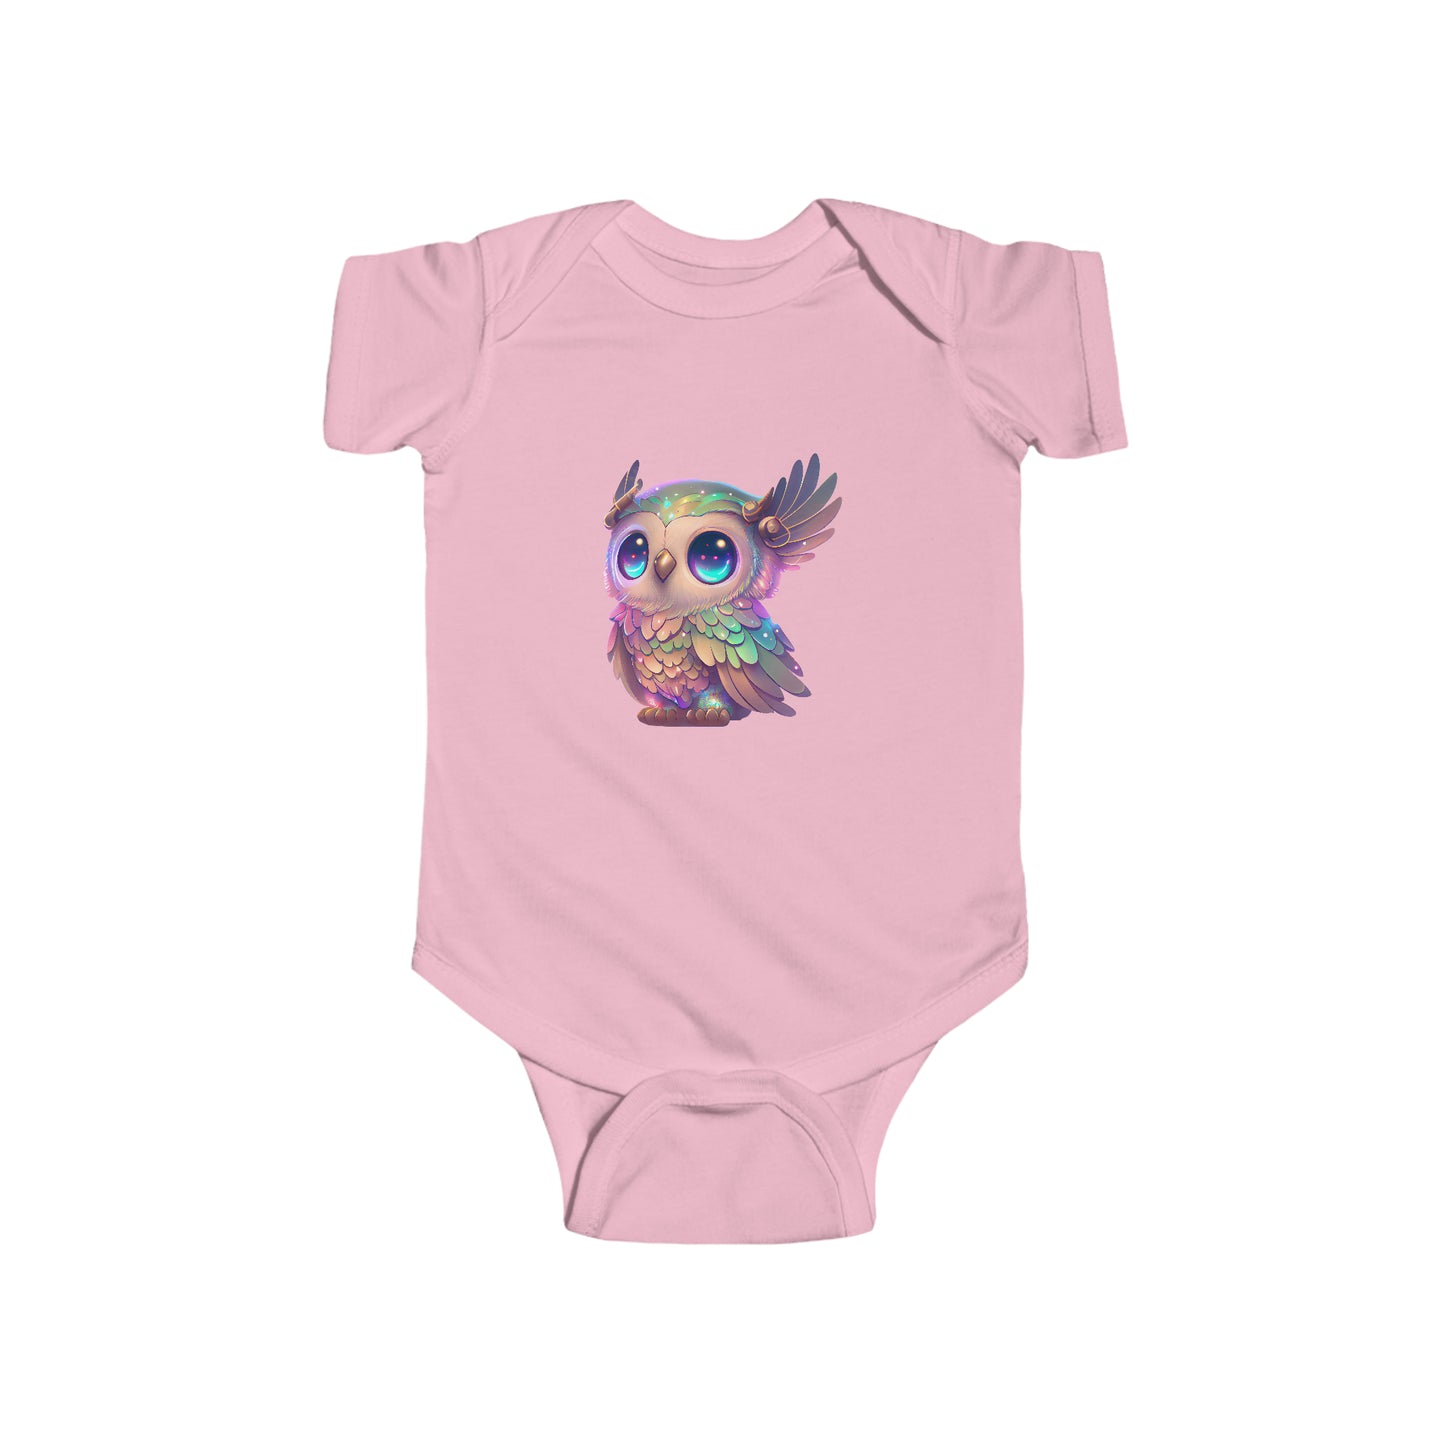 Rainbow Owl Infant Fine Jersey Bodysuit, Plastic Snaps At The Cross Closure For Easy Changing Access